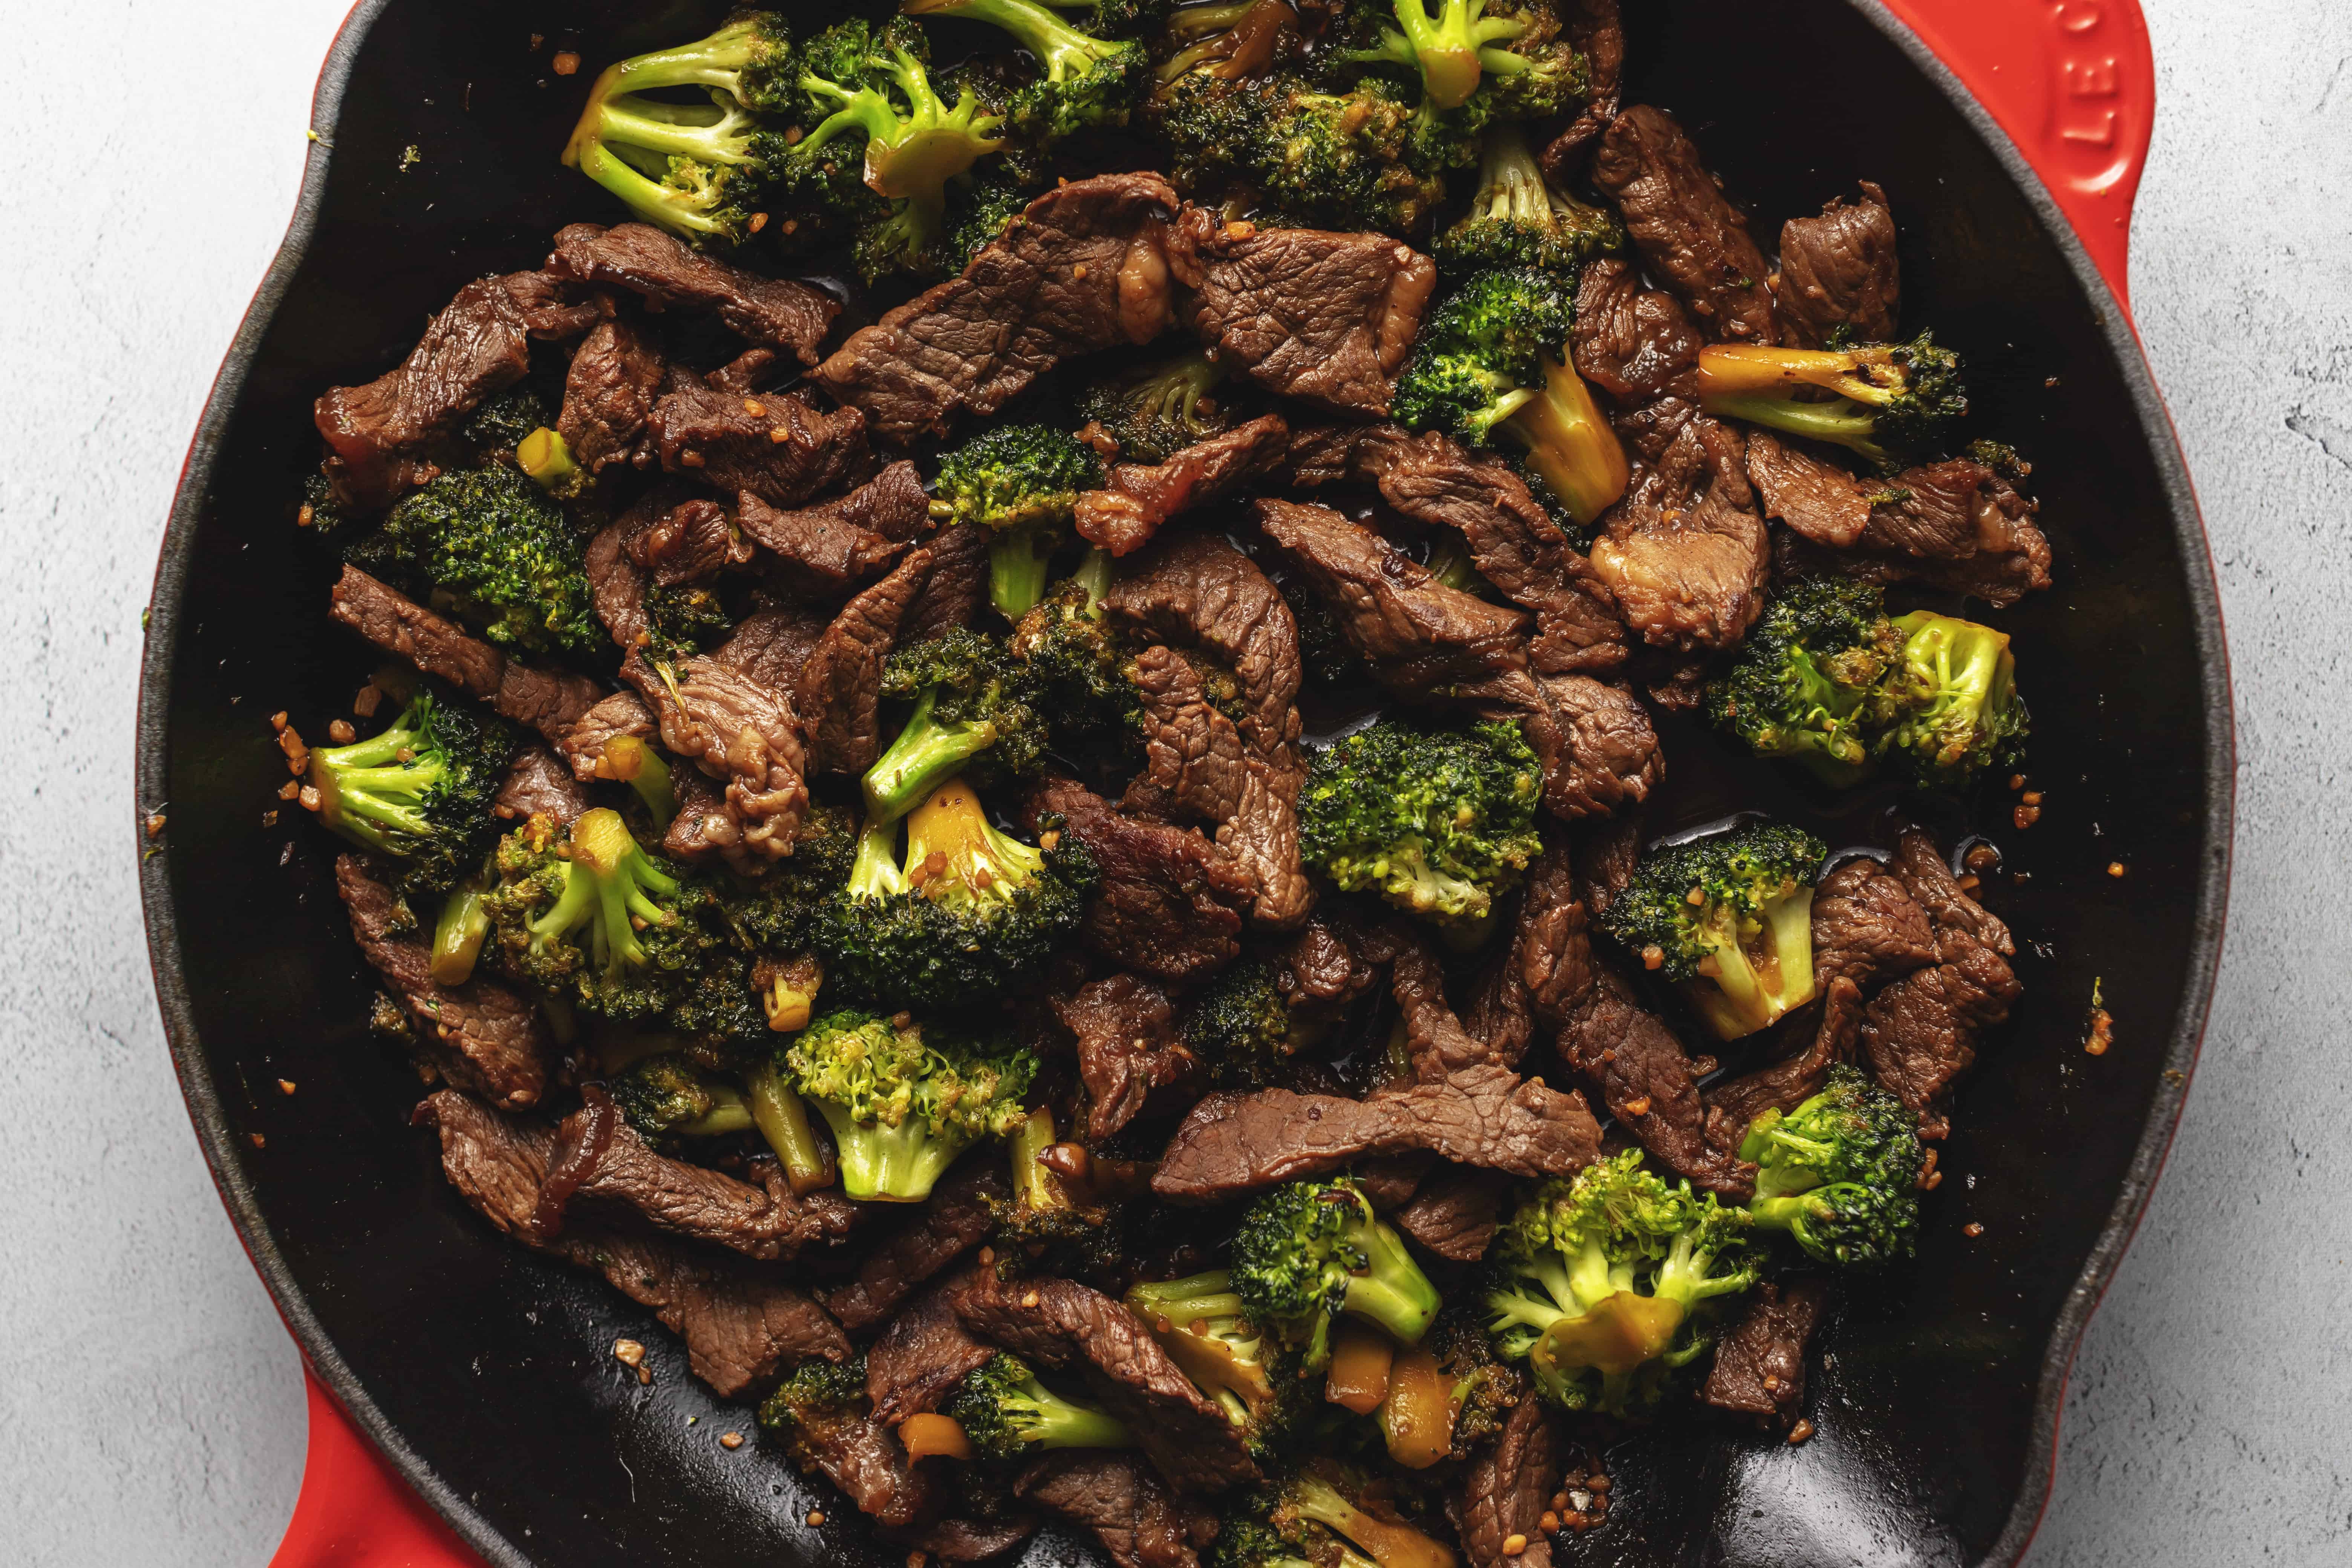 keto beef and broccoli in a skillet